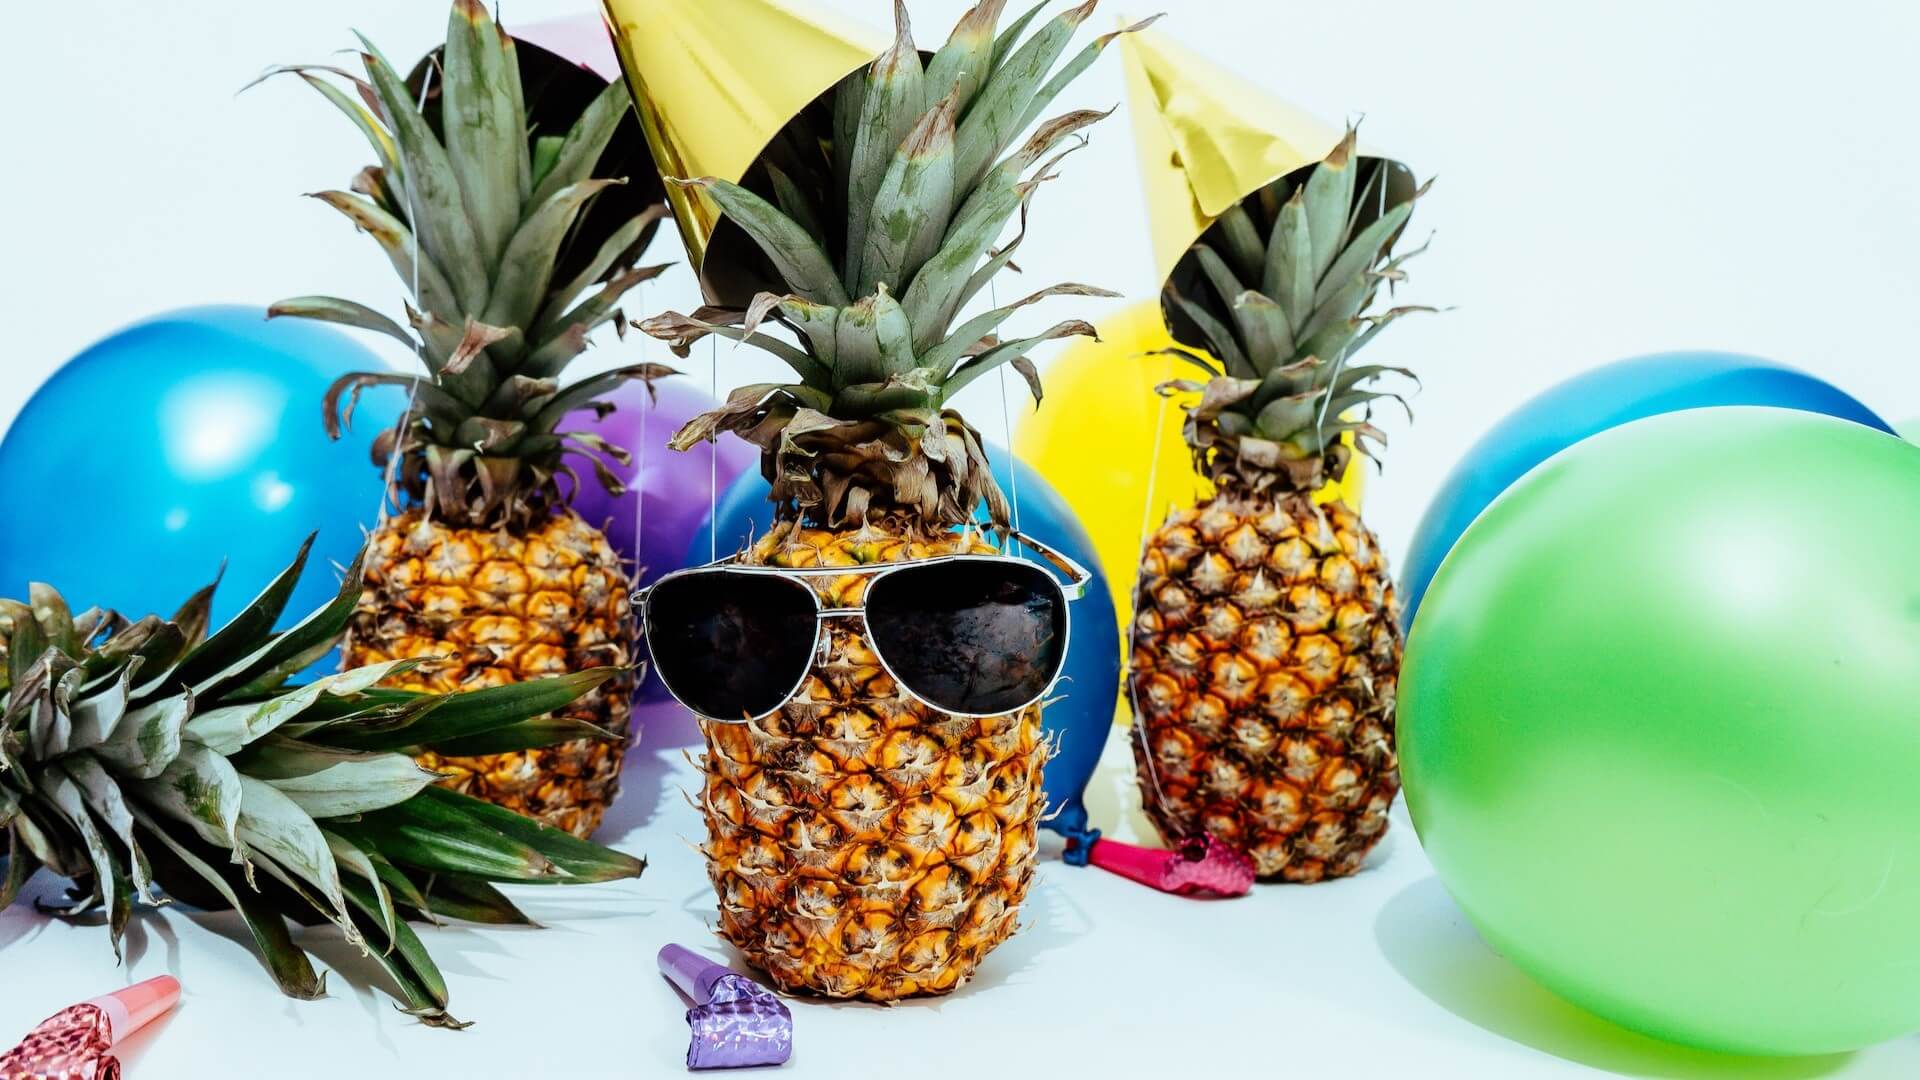 Tropical-themed party with pineapple decorations.